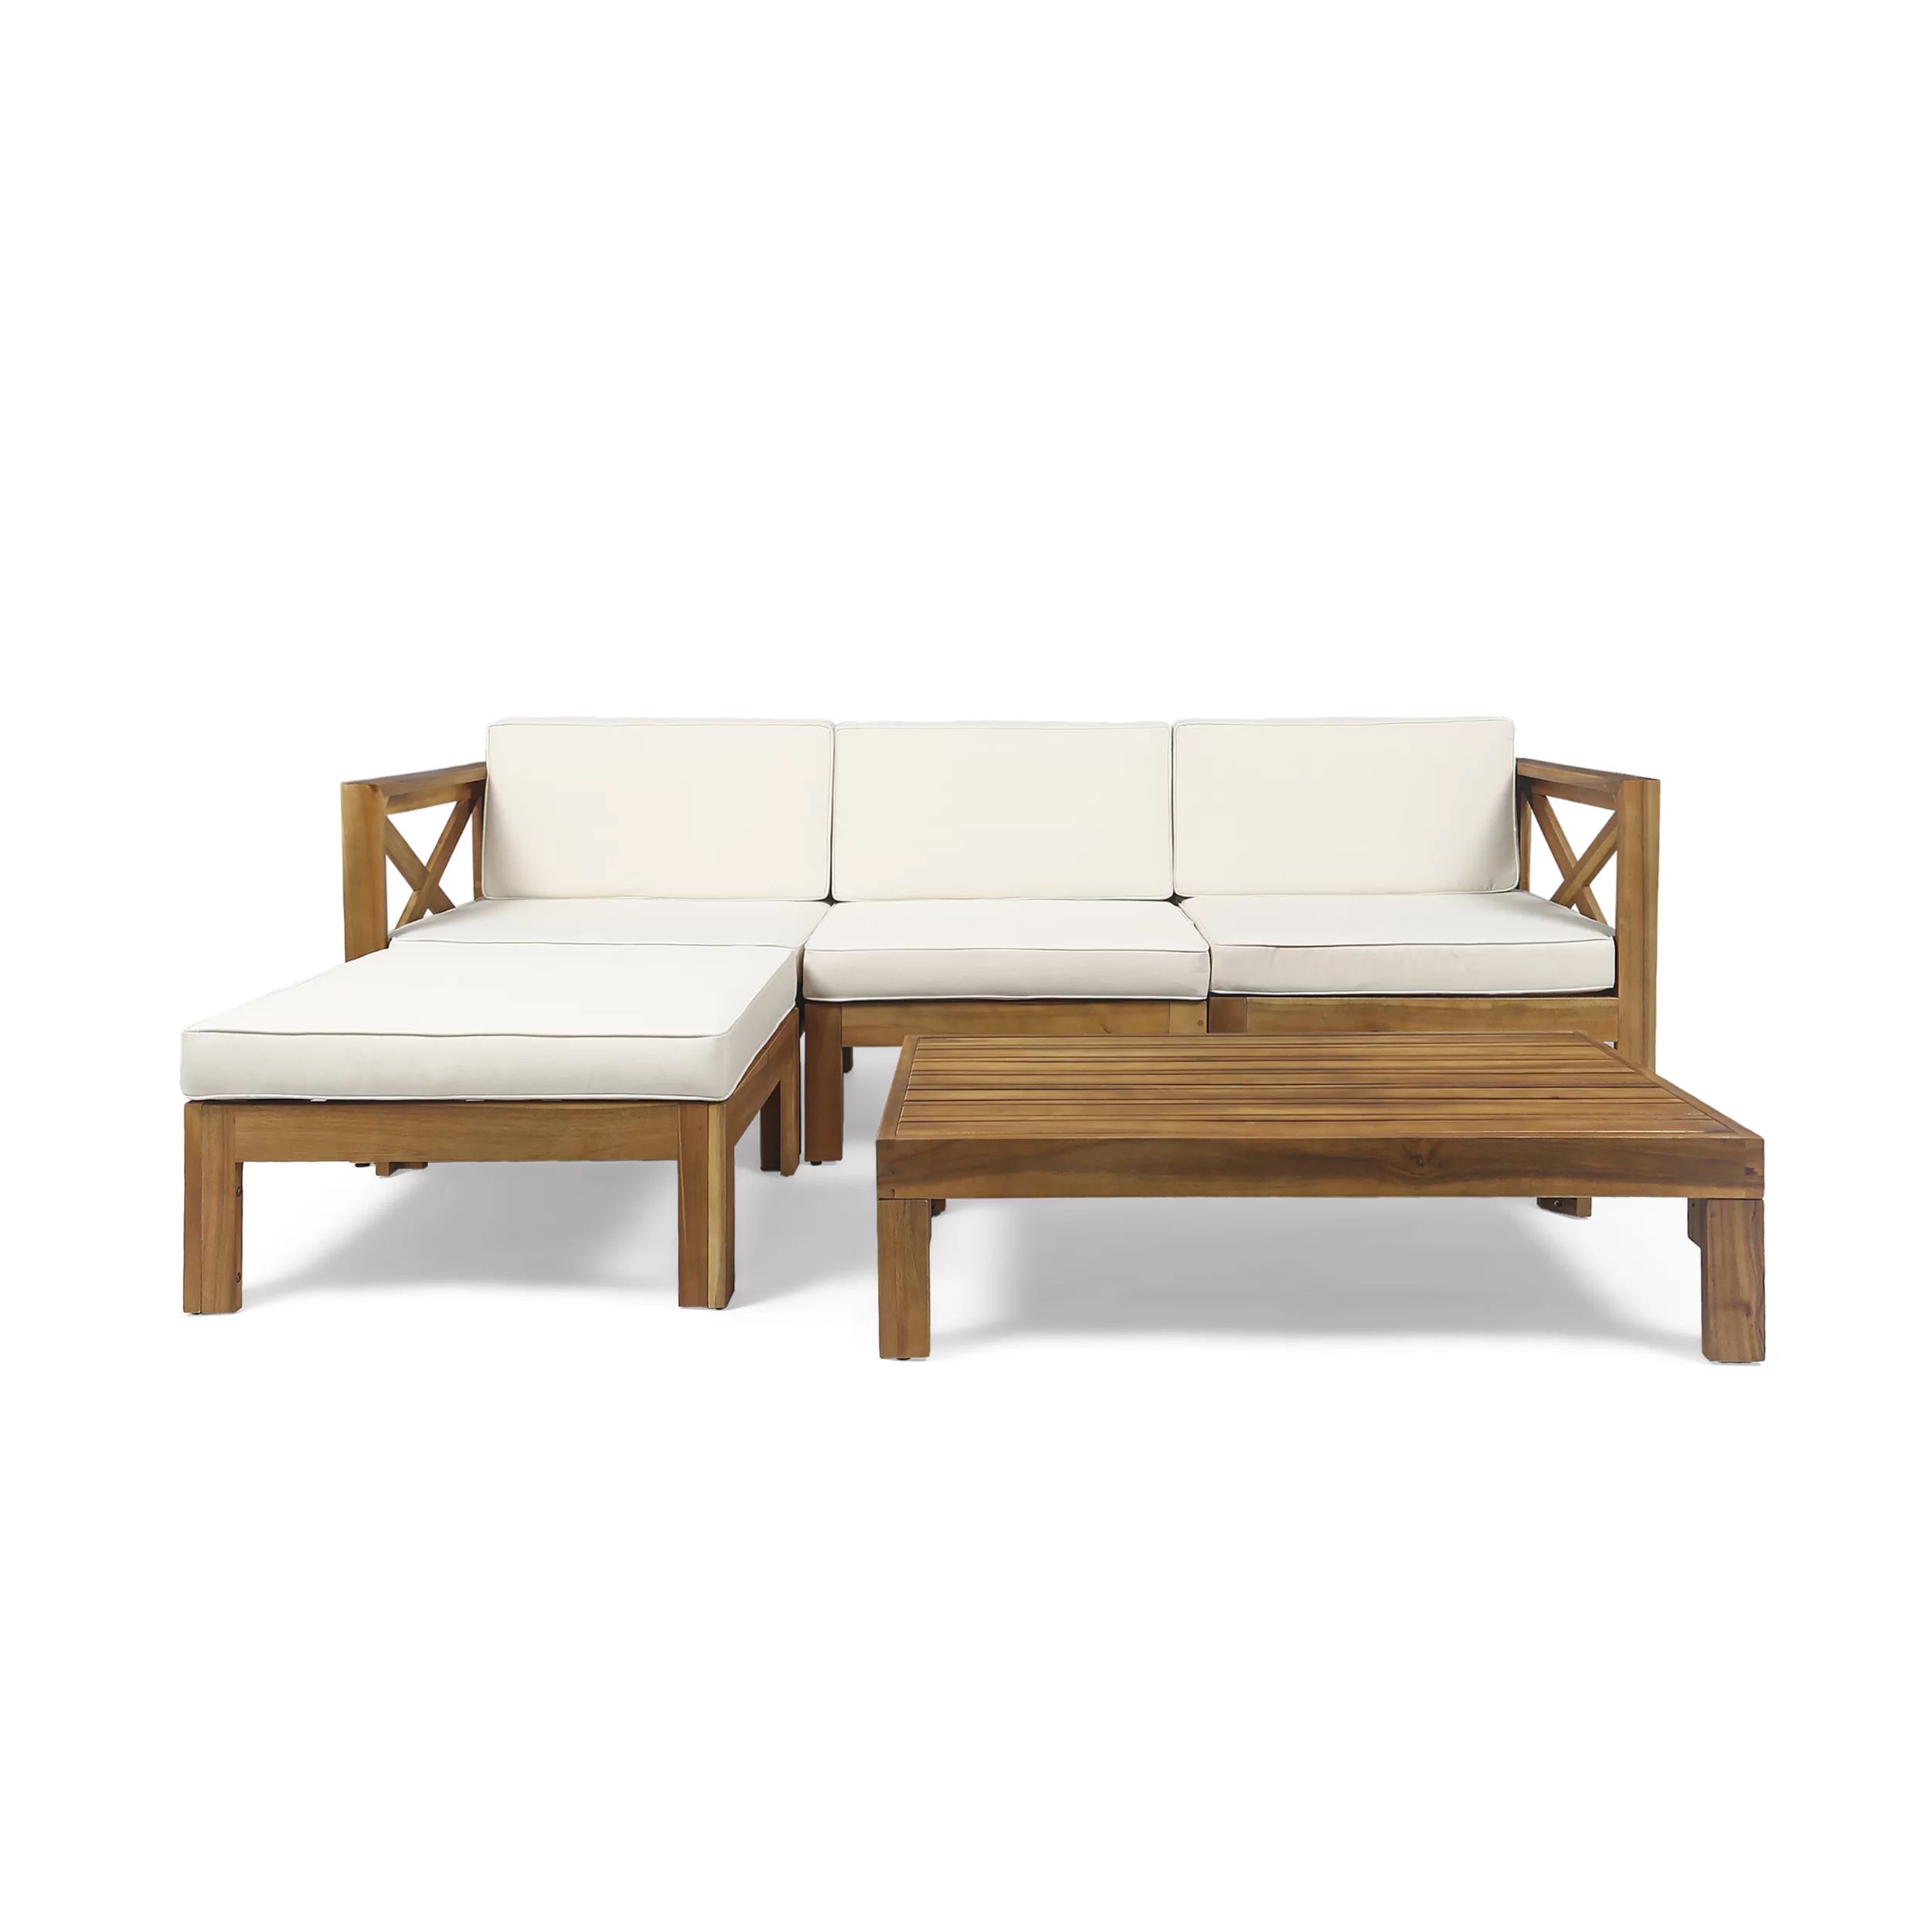 Barcomb Solid Wood 3 - Person Seating Group with Cushions | Wayfair North America